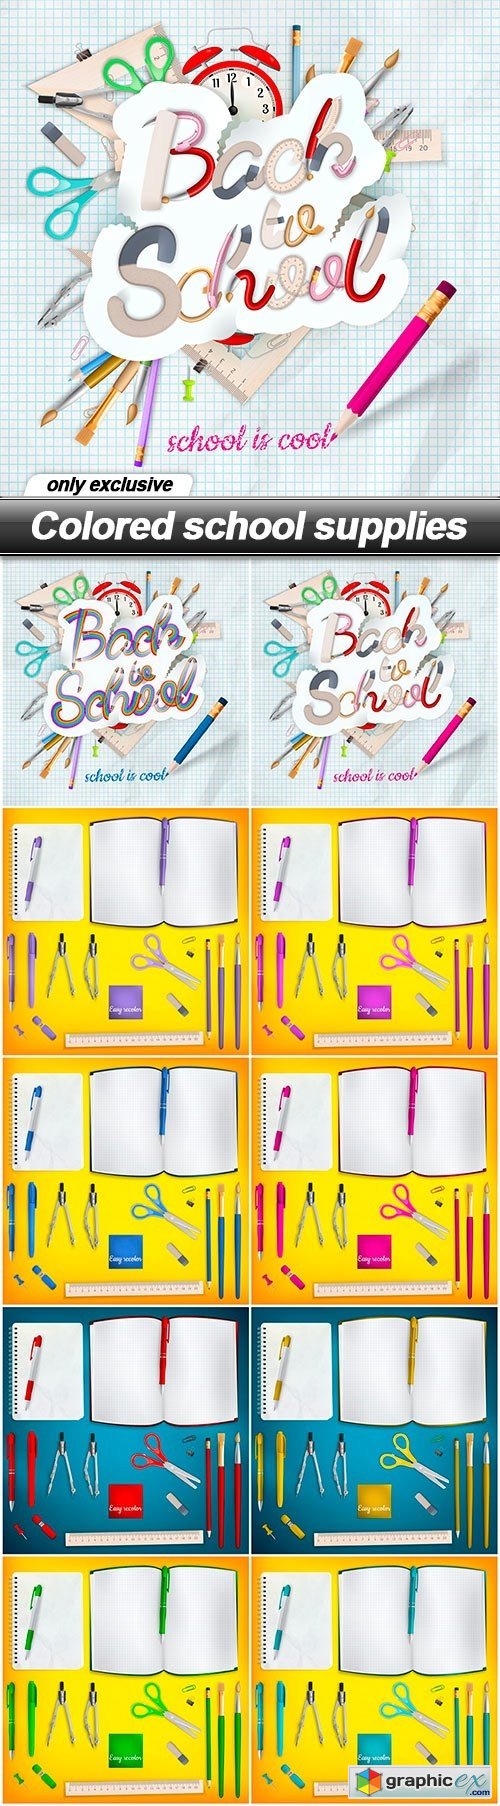 Colored school supplies - 10 EPS